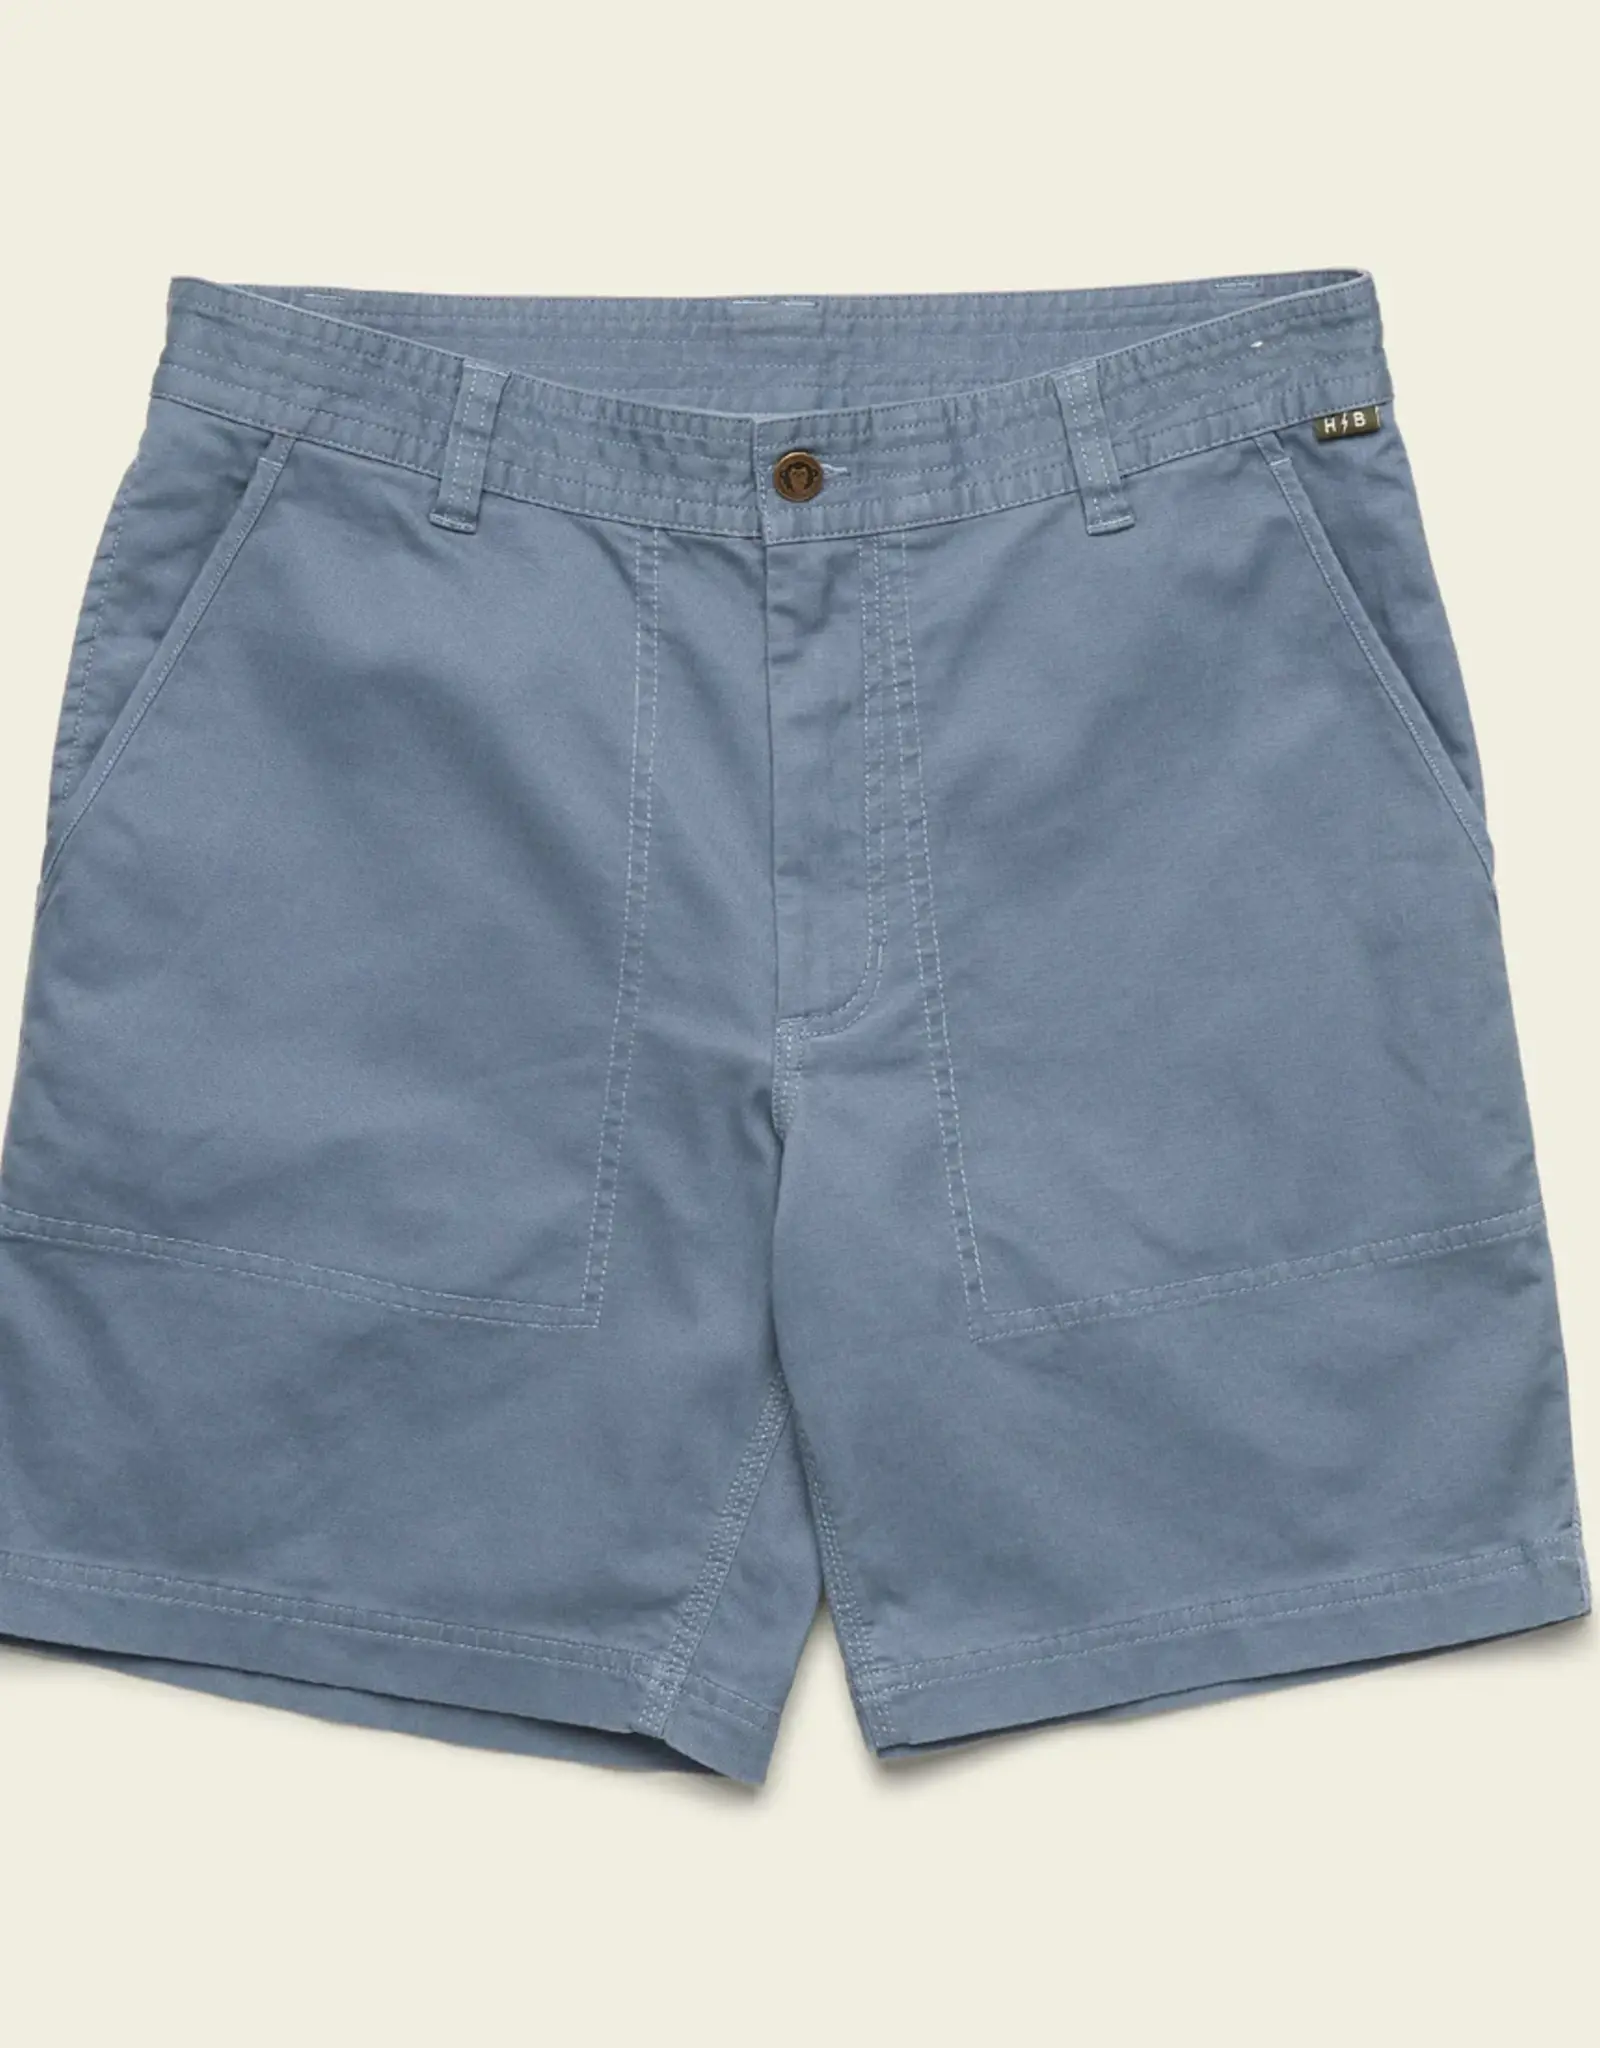 Howler Brothers Clarksville Walk Shorts